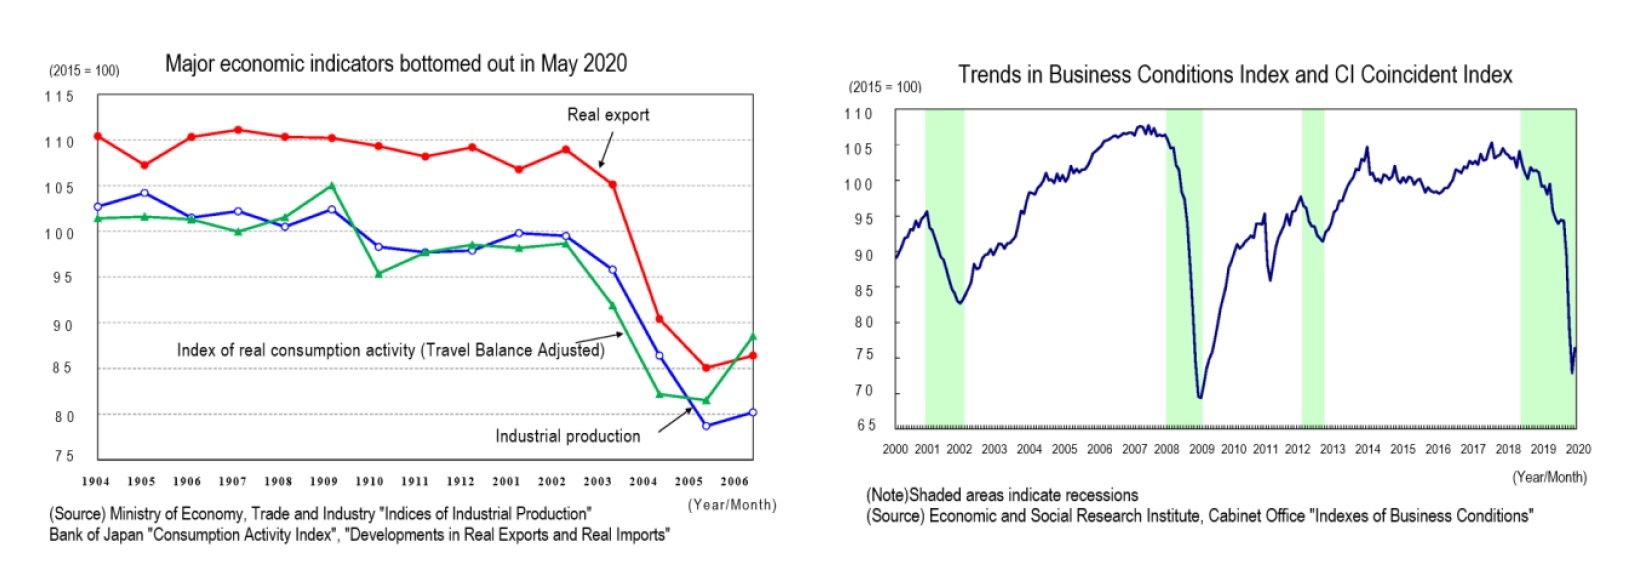 Major economic indicators bottomed out in May 2020/Trends Business Conditions Index and CI Coincident Index